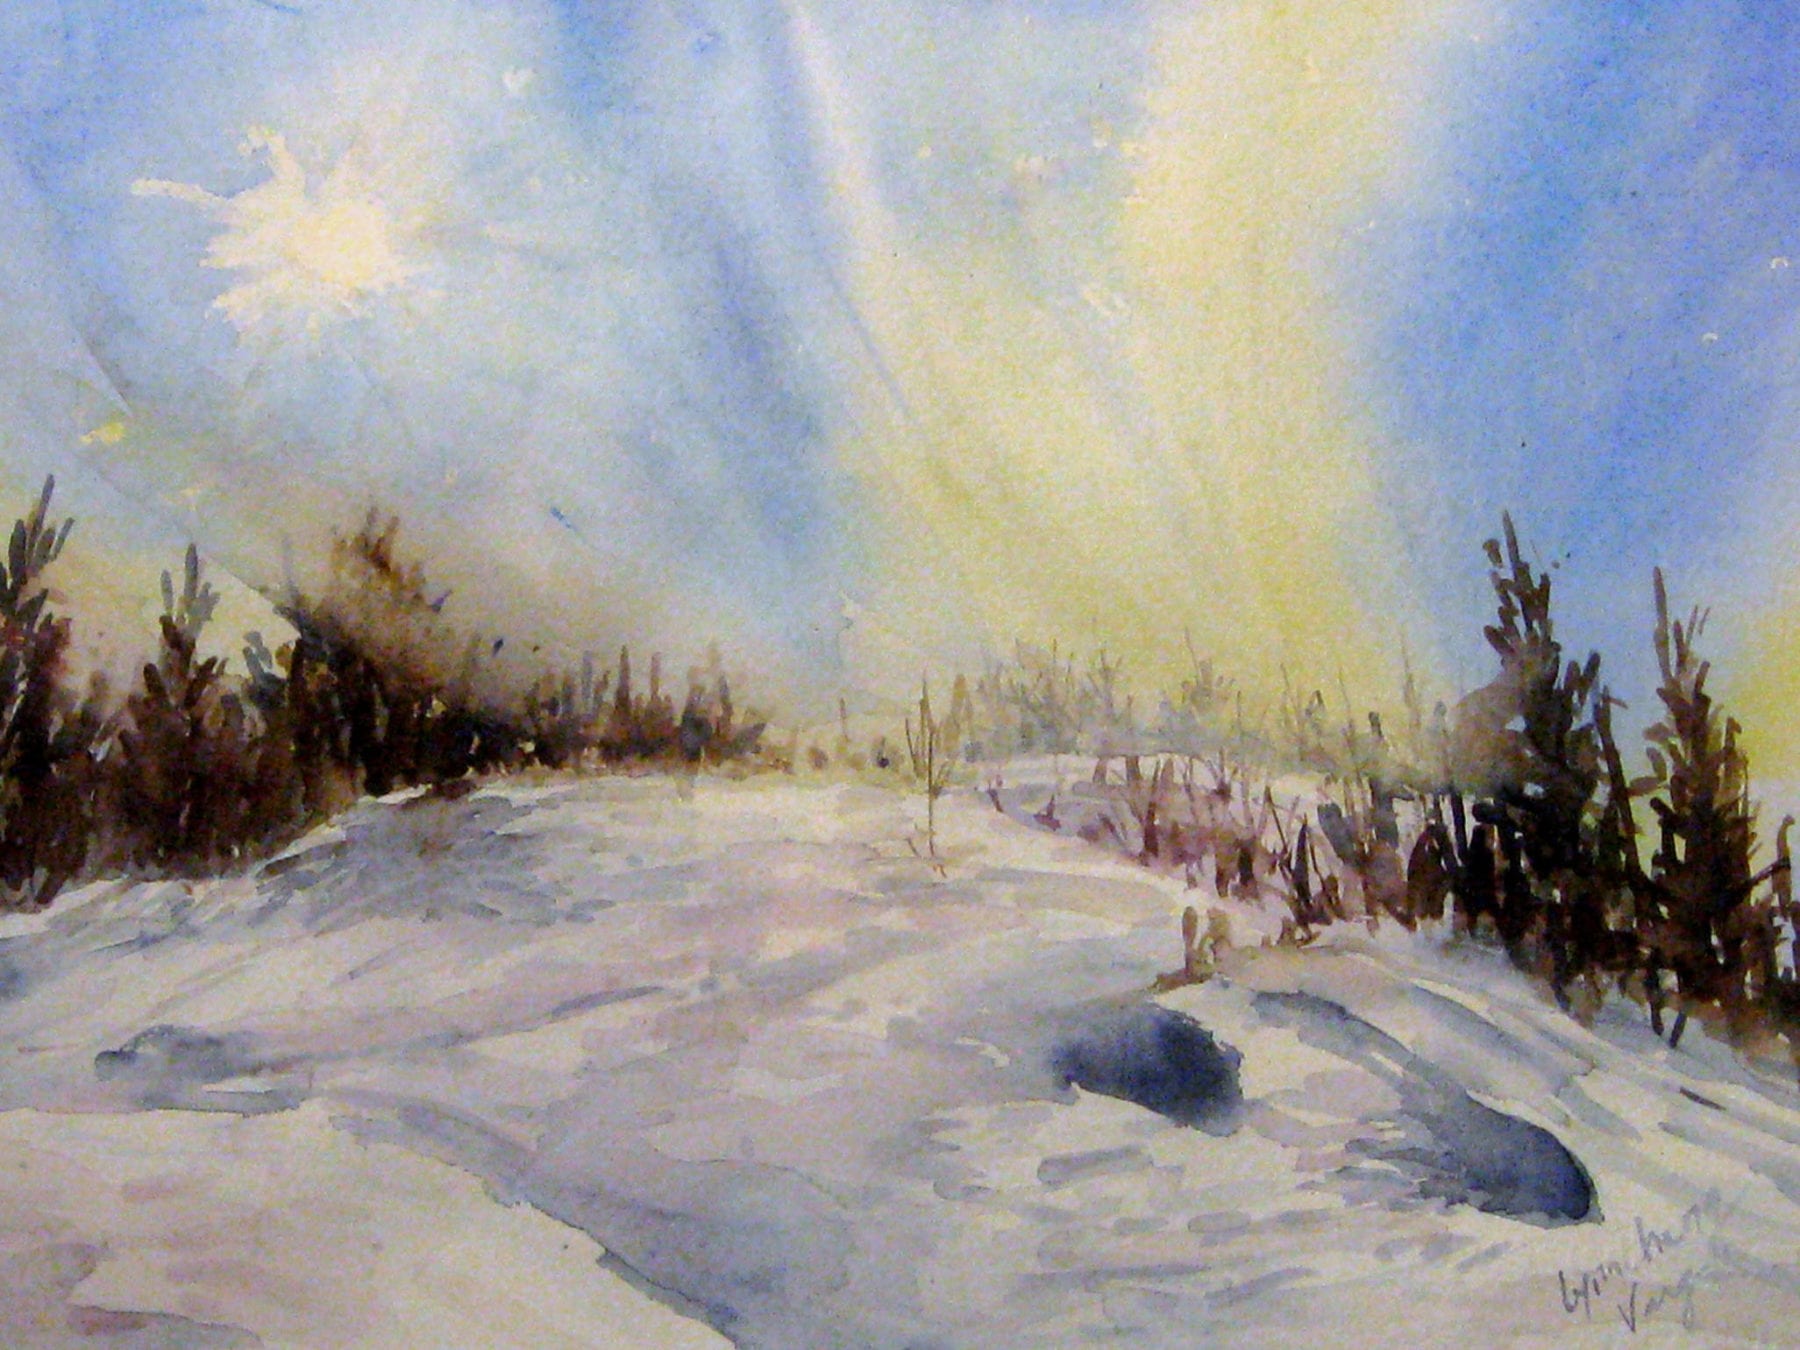 Lynn Cheng Varga, Northern Light, watercolor on cold pressed paper, 23.5 x 16.5